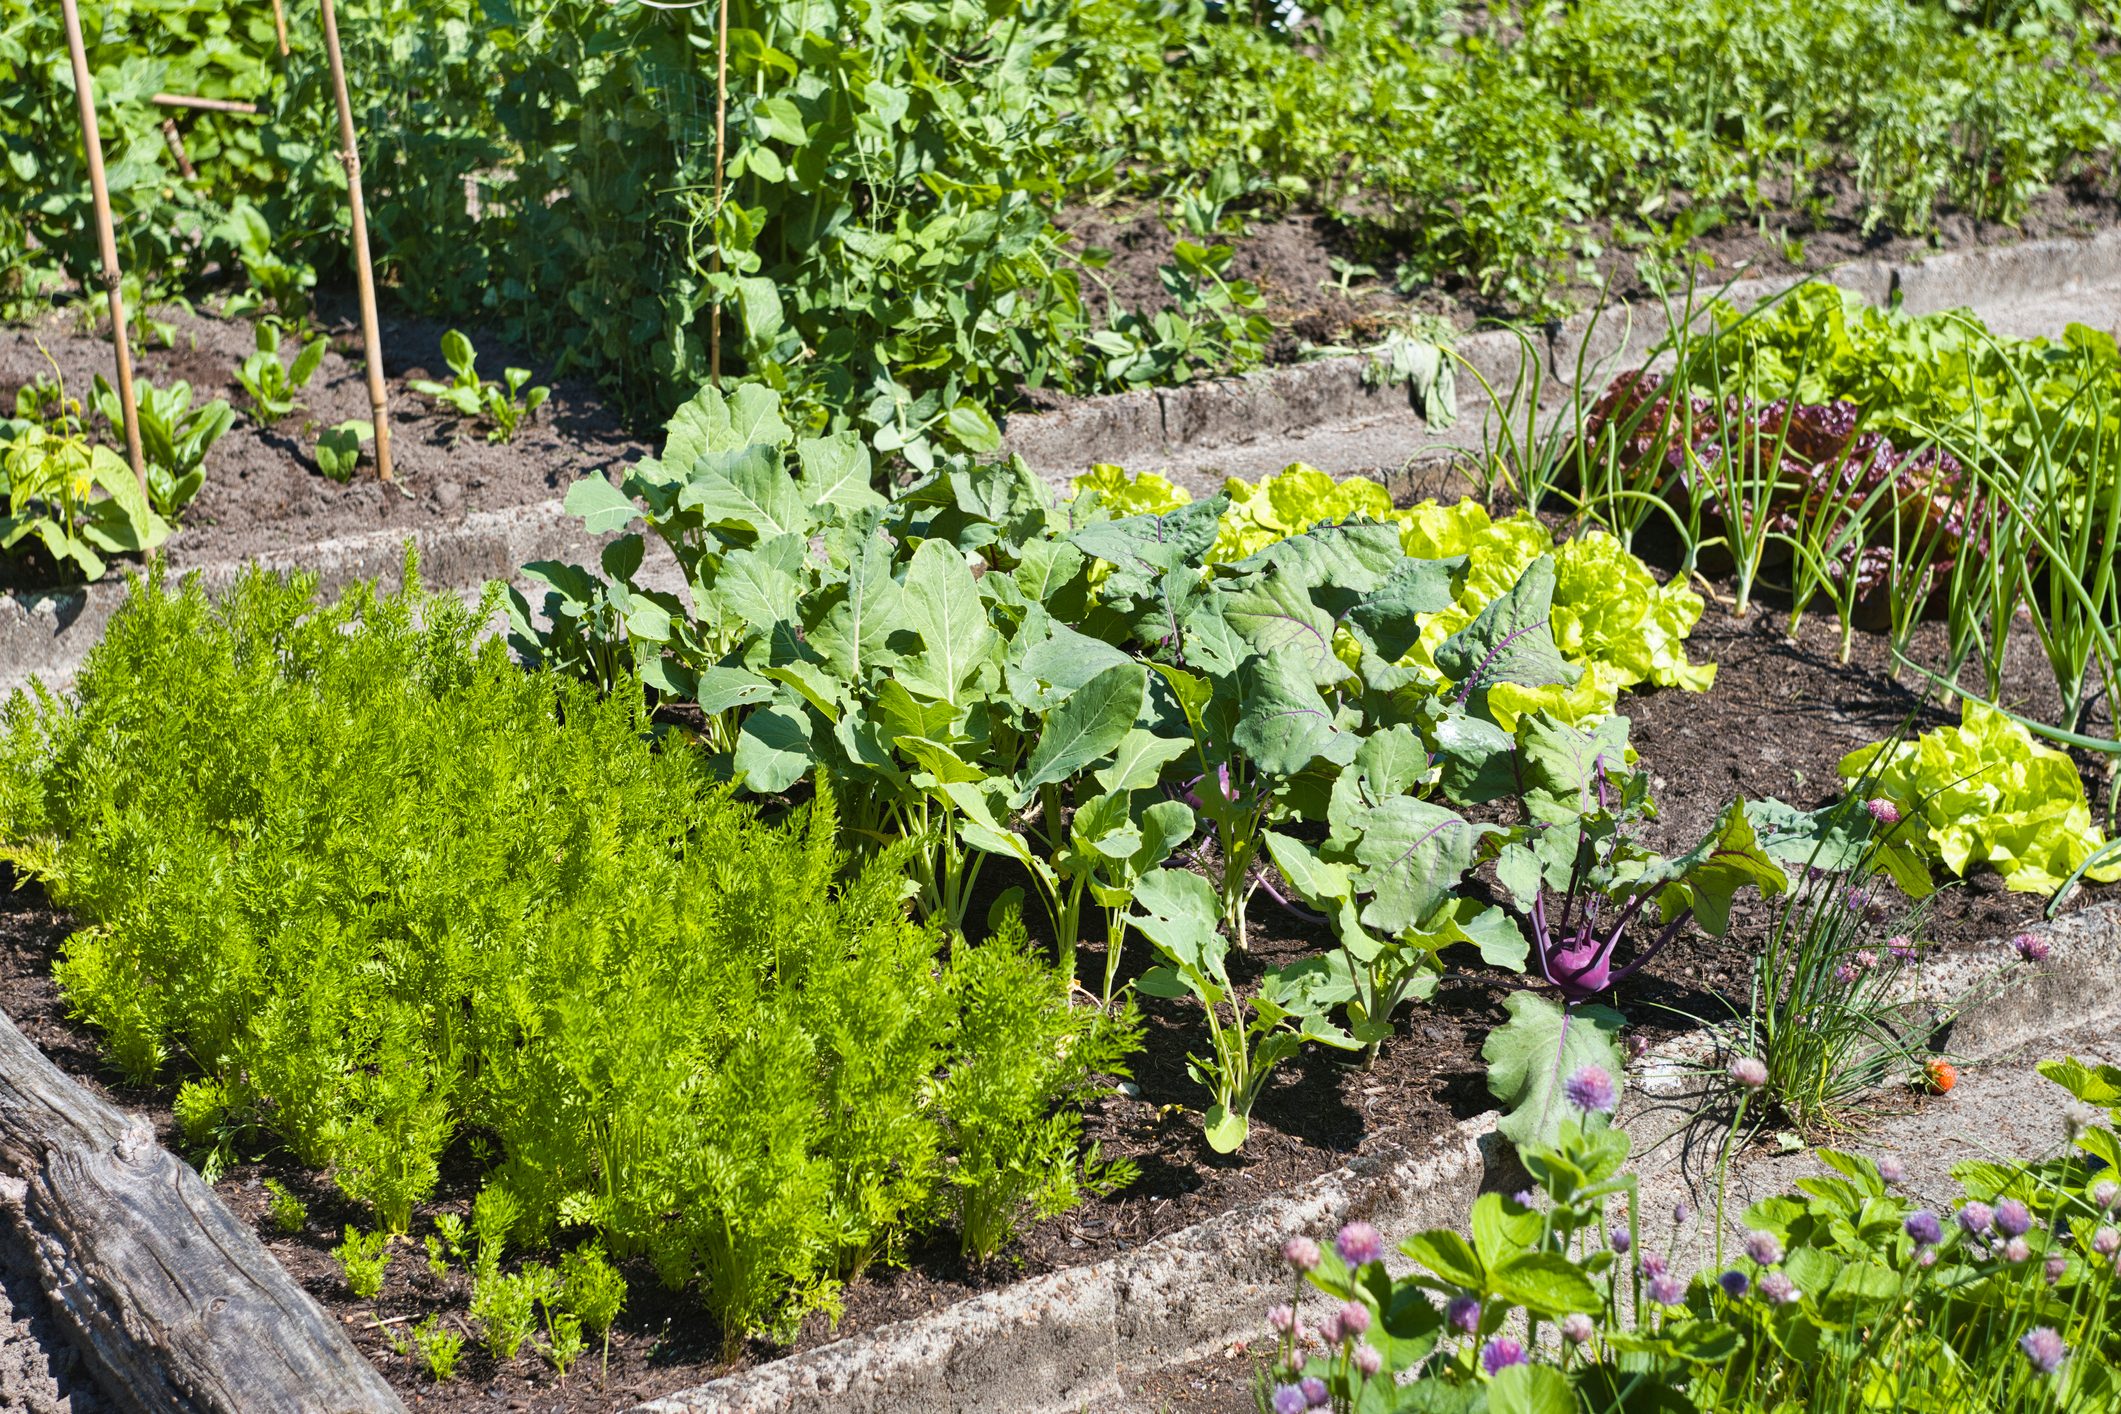 Close-up of vegetables growing in a vegetable garden, Germany